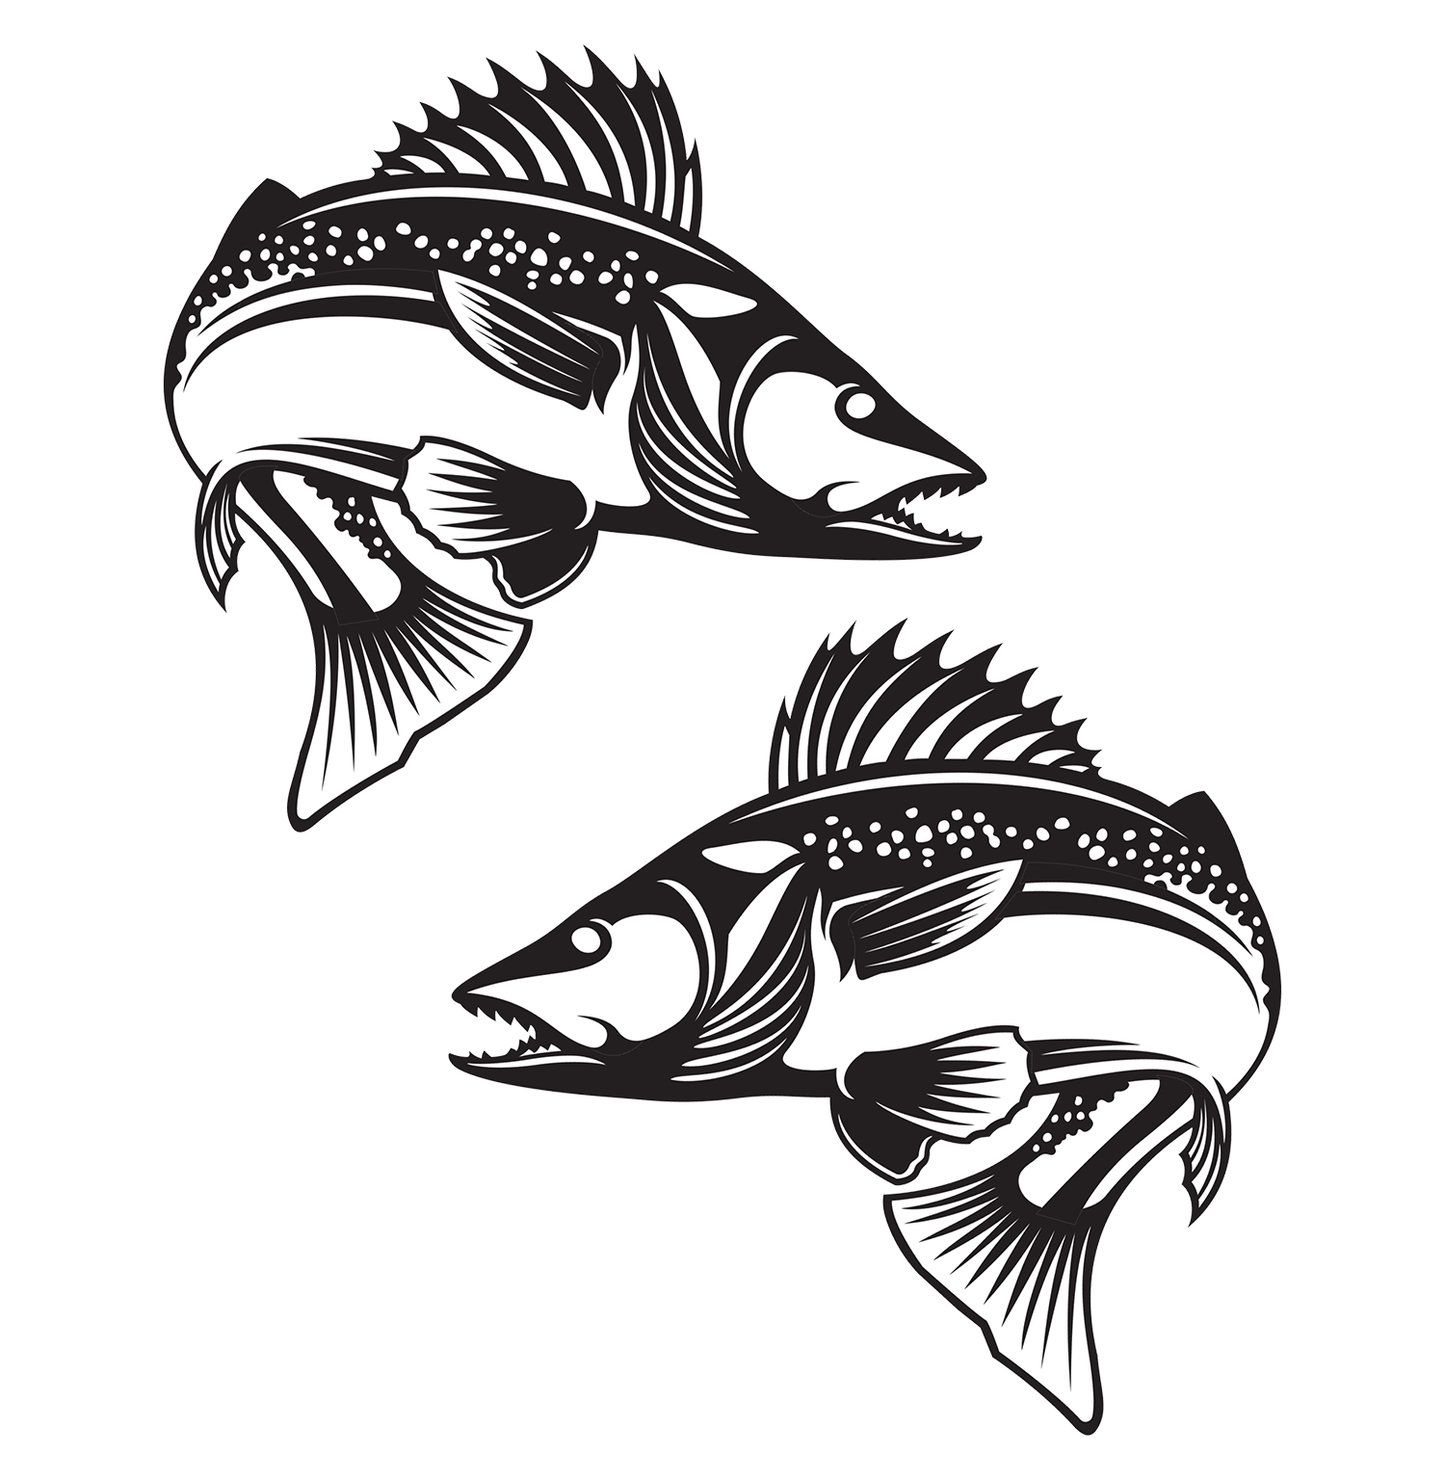 Walleye Decals left and Right facing.